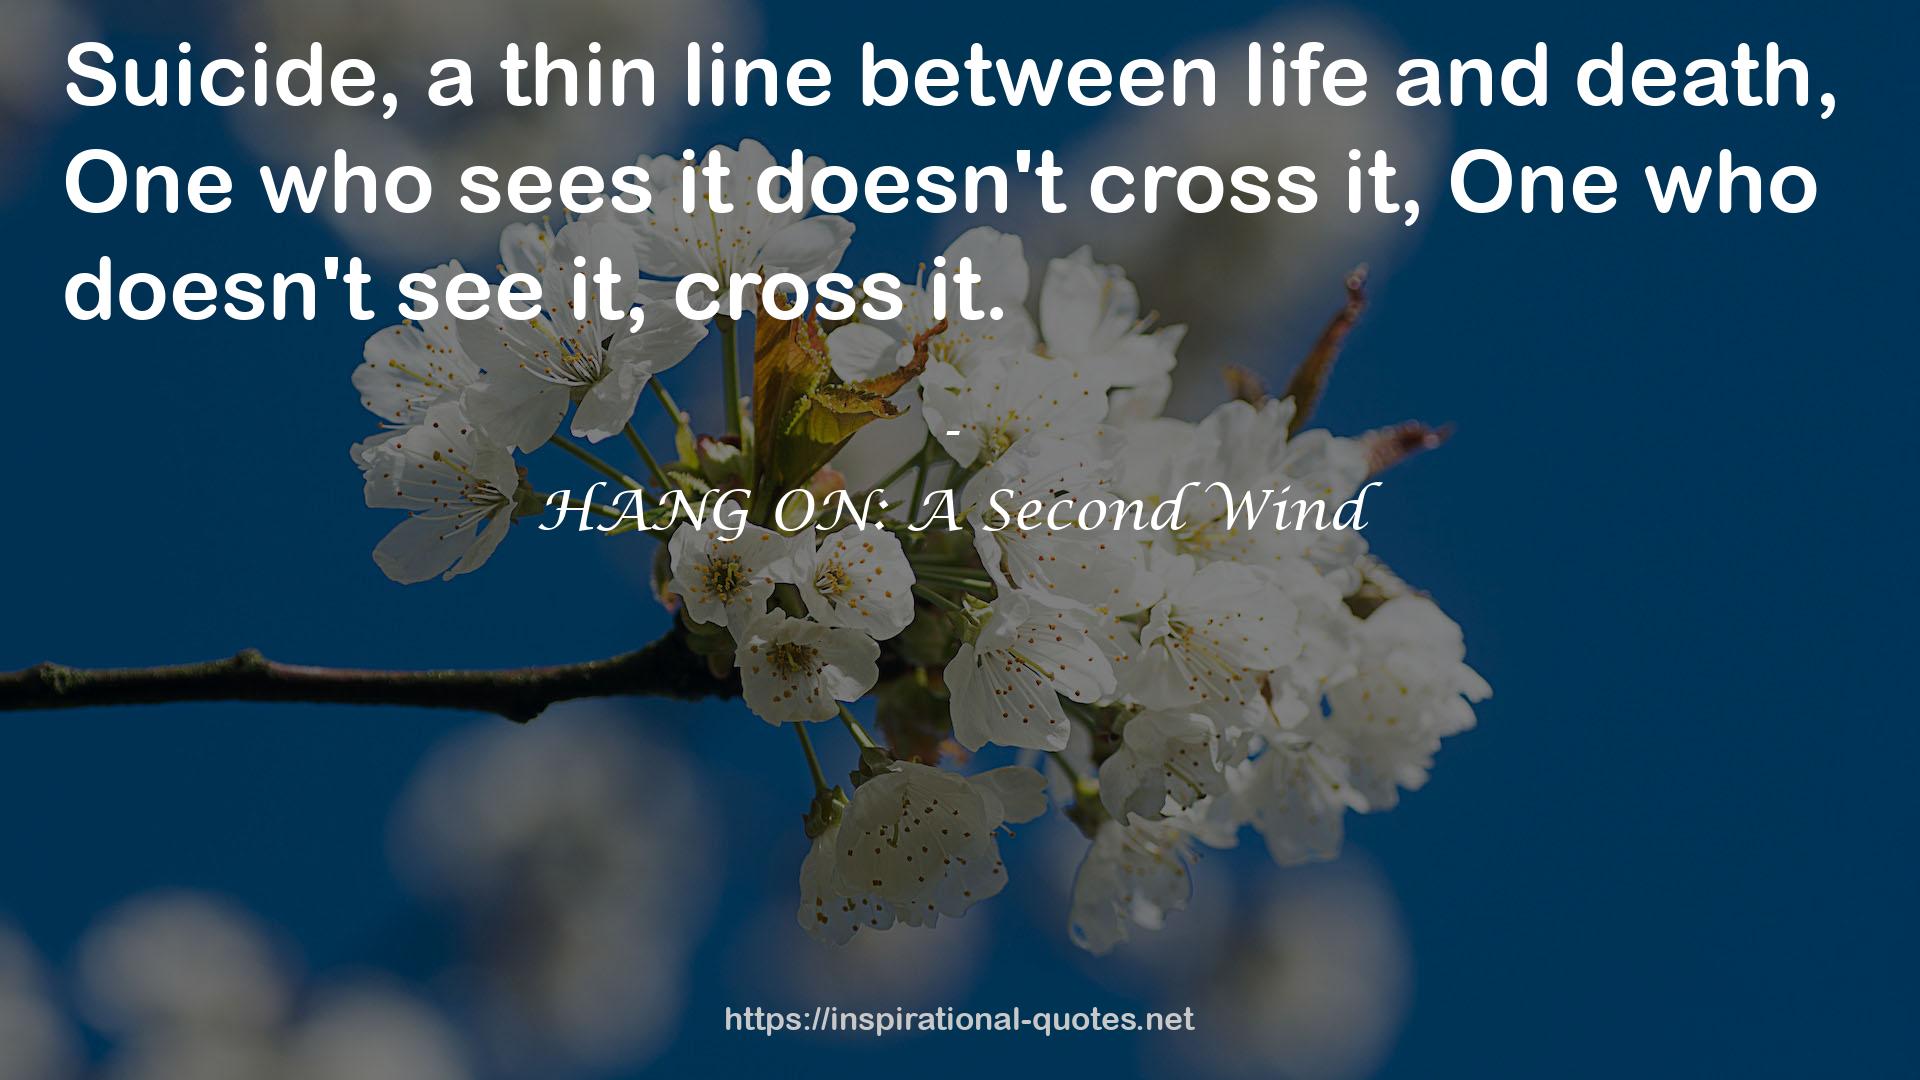 HANG ON: A Second Wind QUOTES